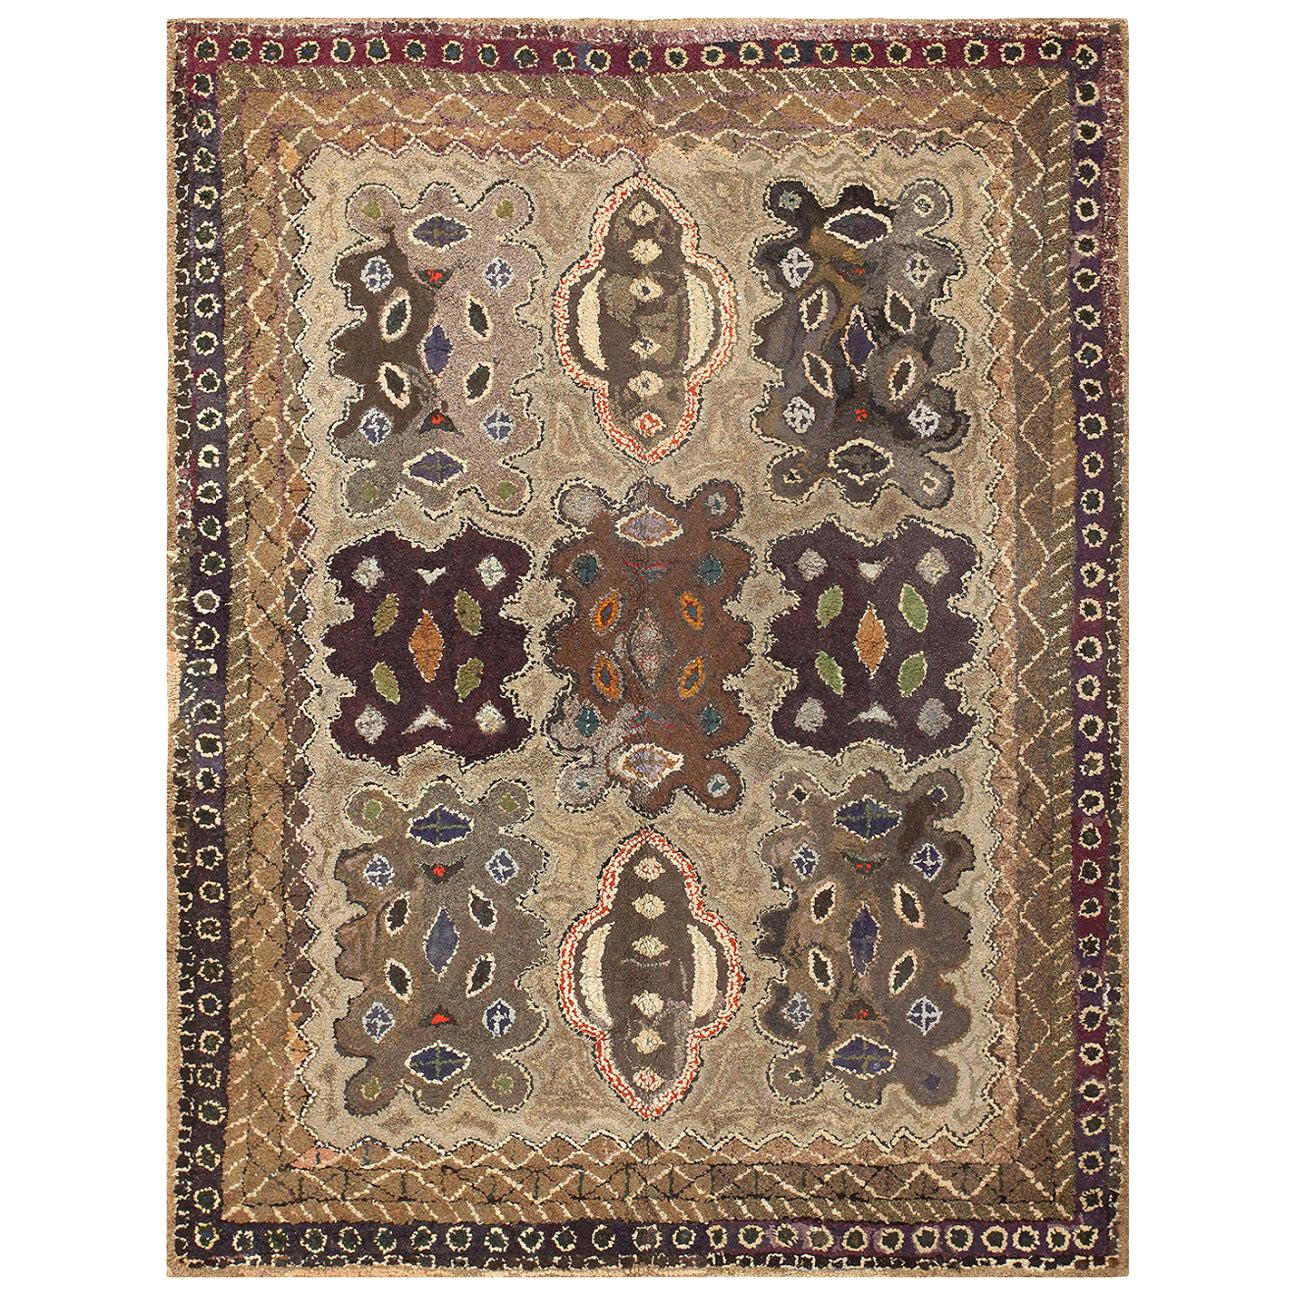 Earthy Antique American Hooked Rug. Size: 6 ft 6 in x 8 ft 9 in 